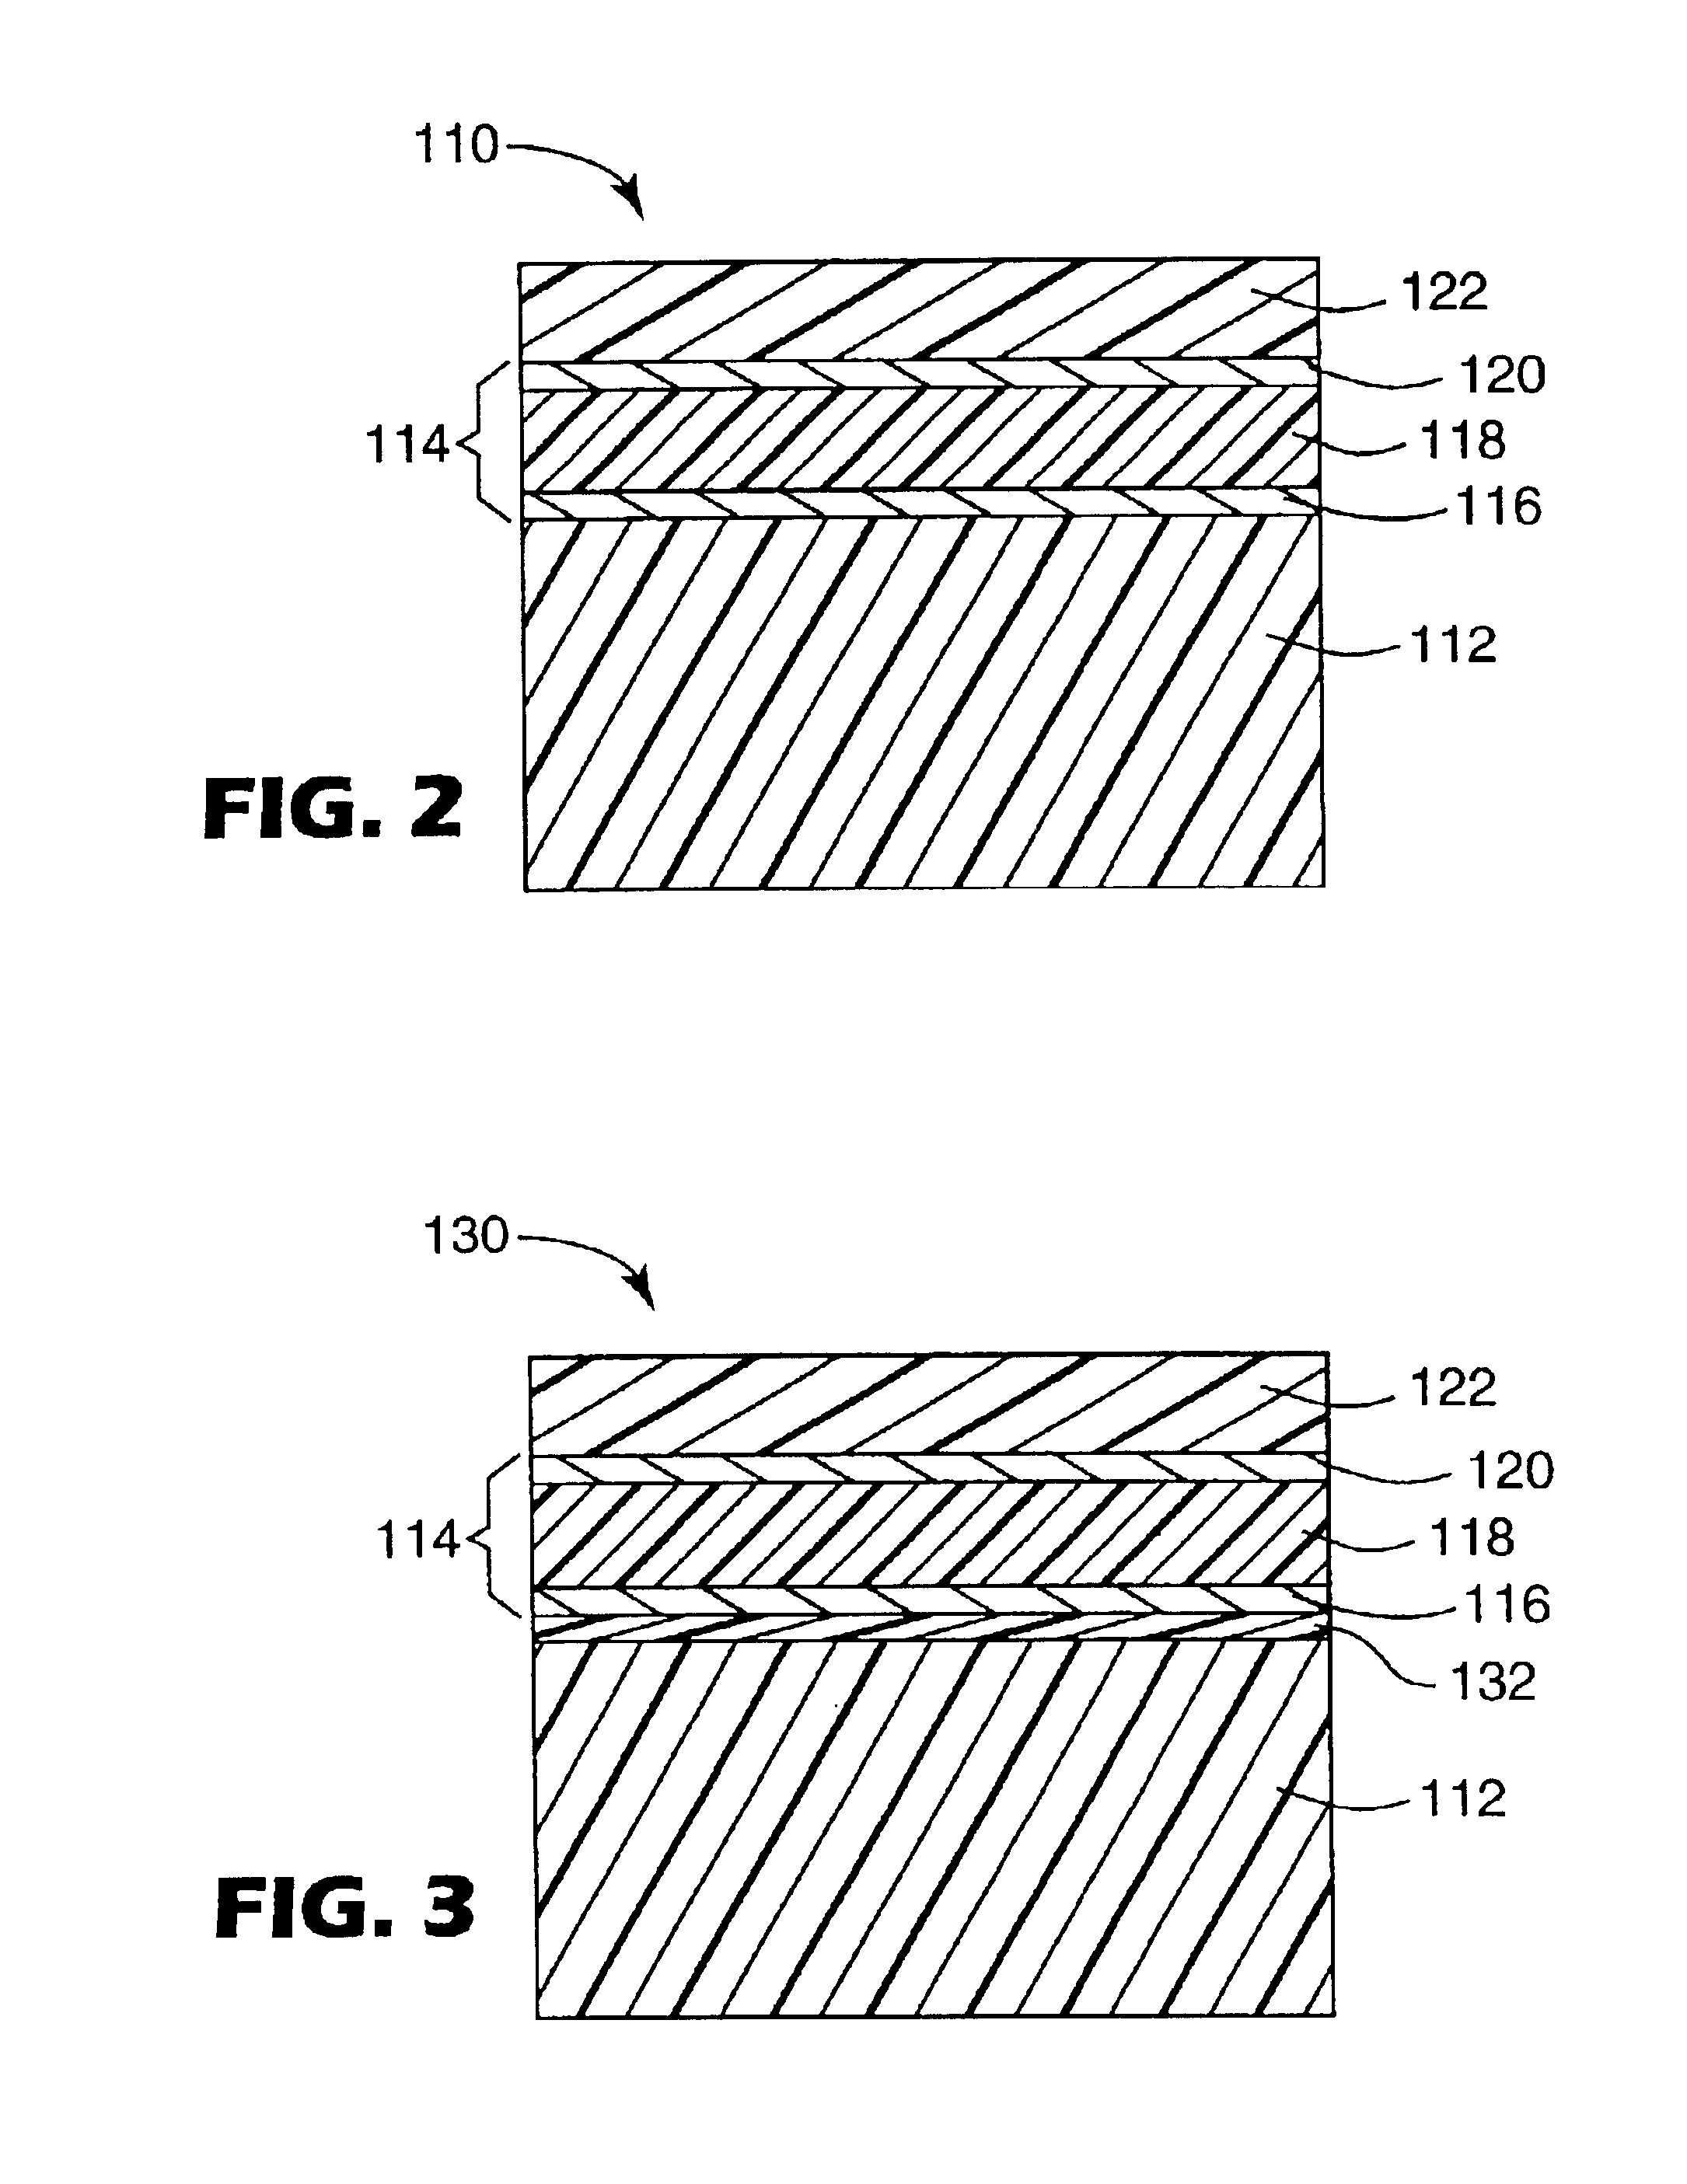 Extensible, visible light-transmissive and infrared-reflective film and methods of making and using the film